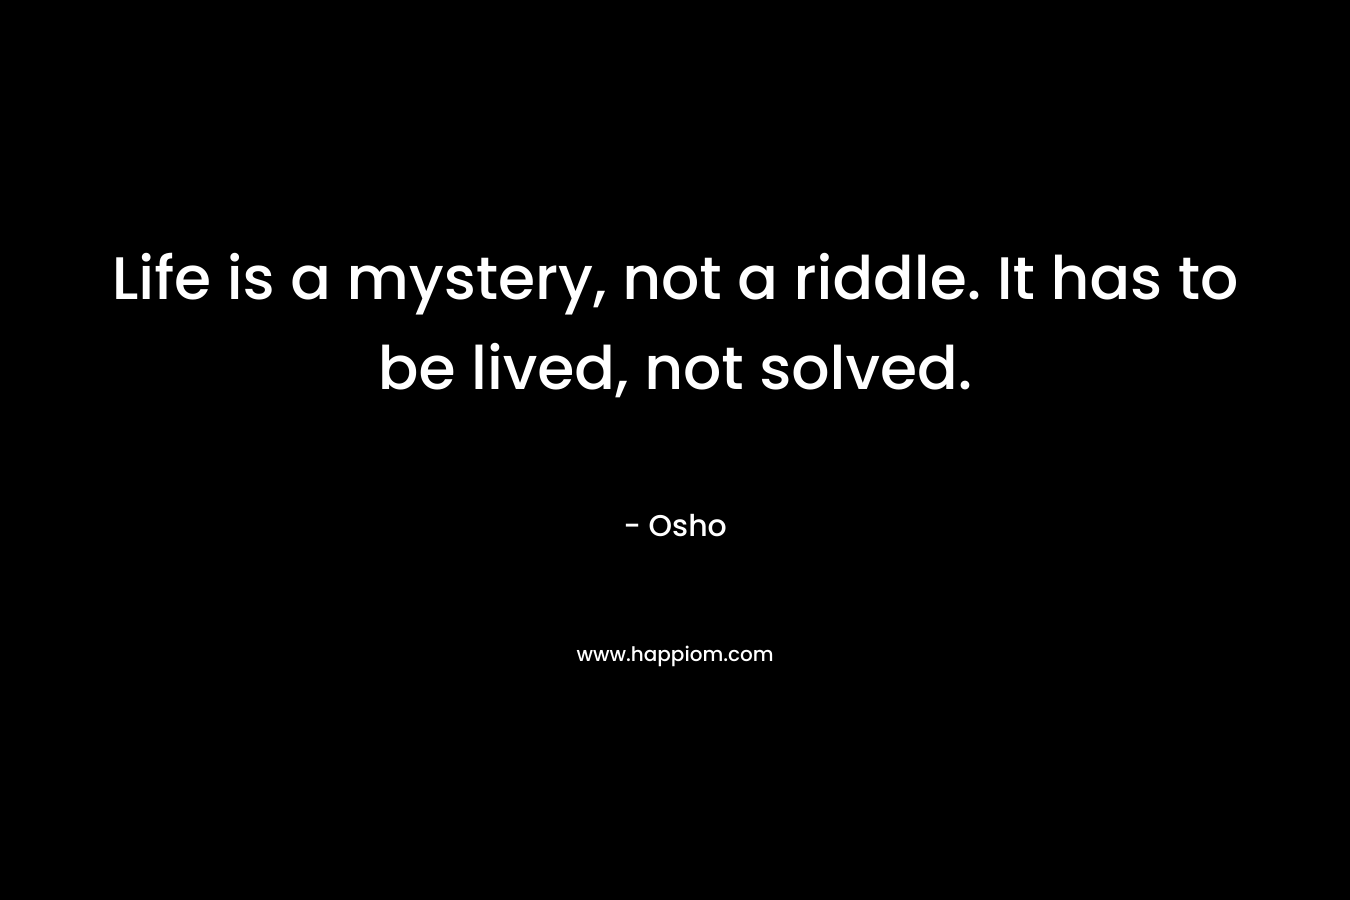 Life is a mystery, not a riddle. It has to be lived, not solved.